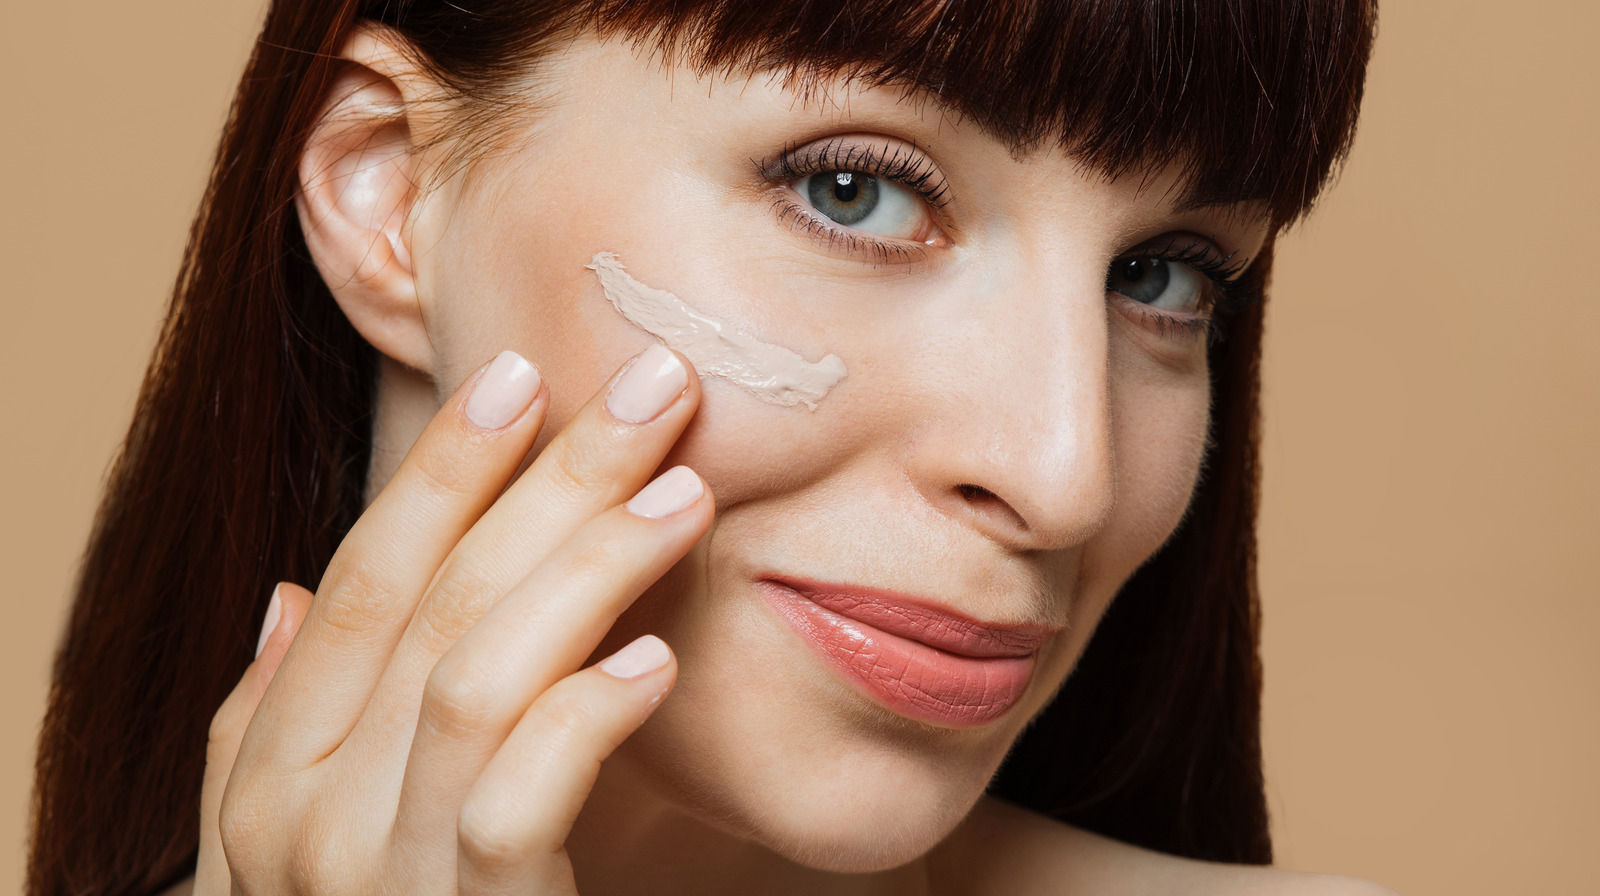 Dermatologist-Approved Ways To DIY Your Own Tinted Moisturizer